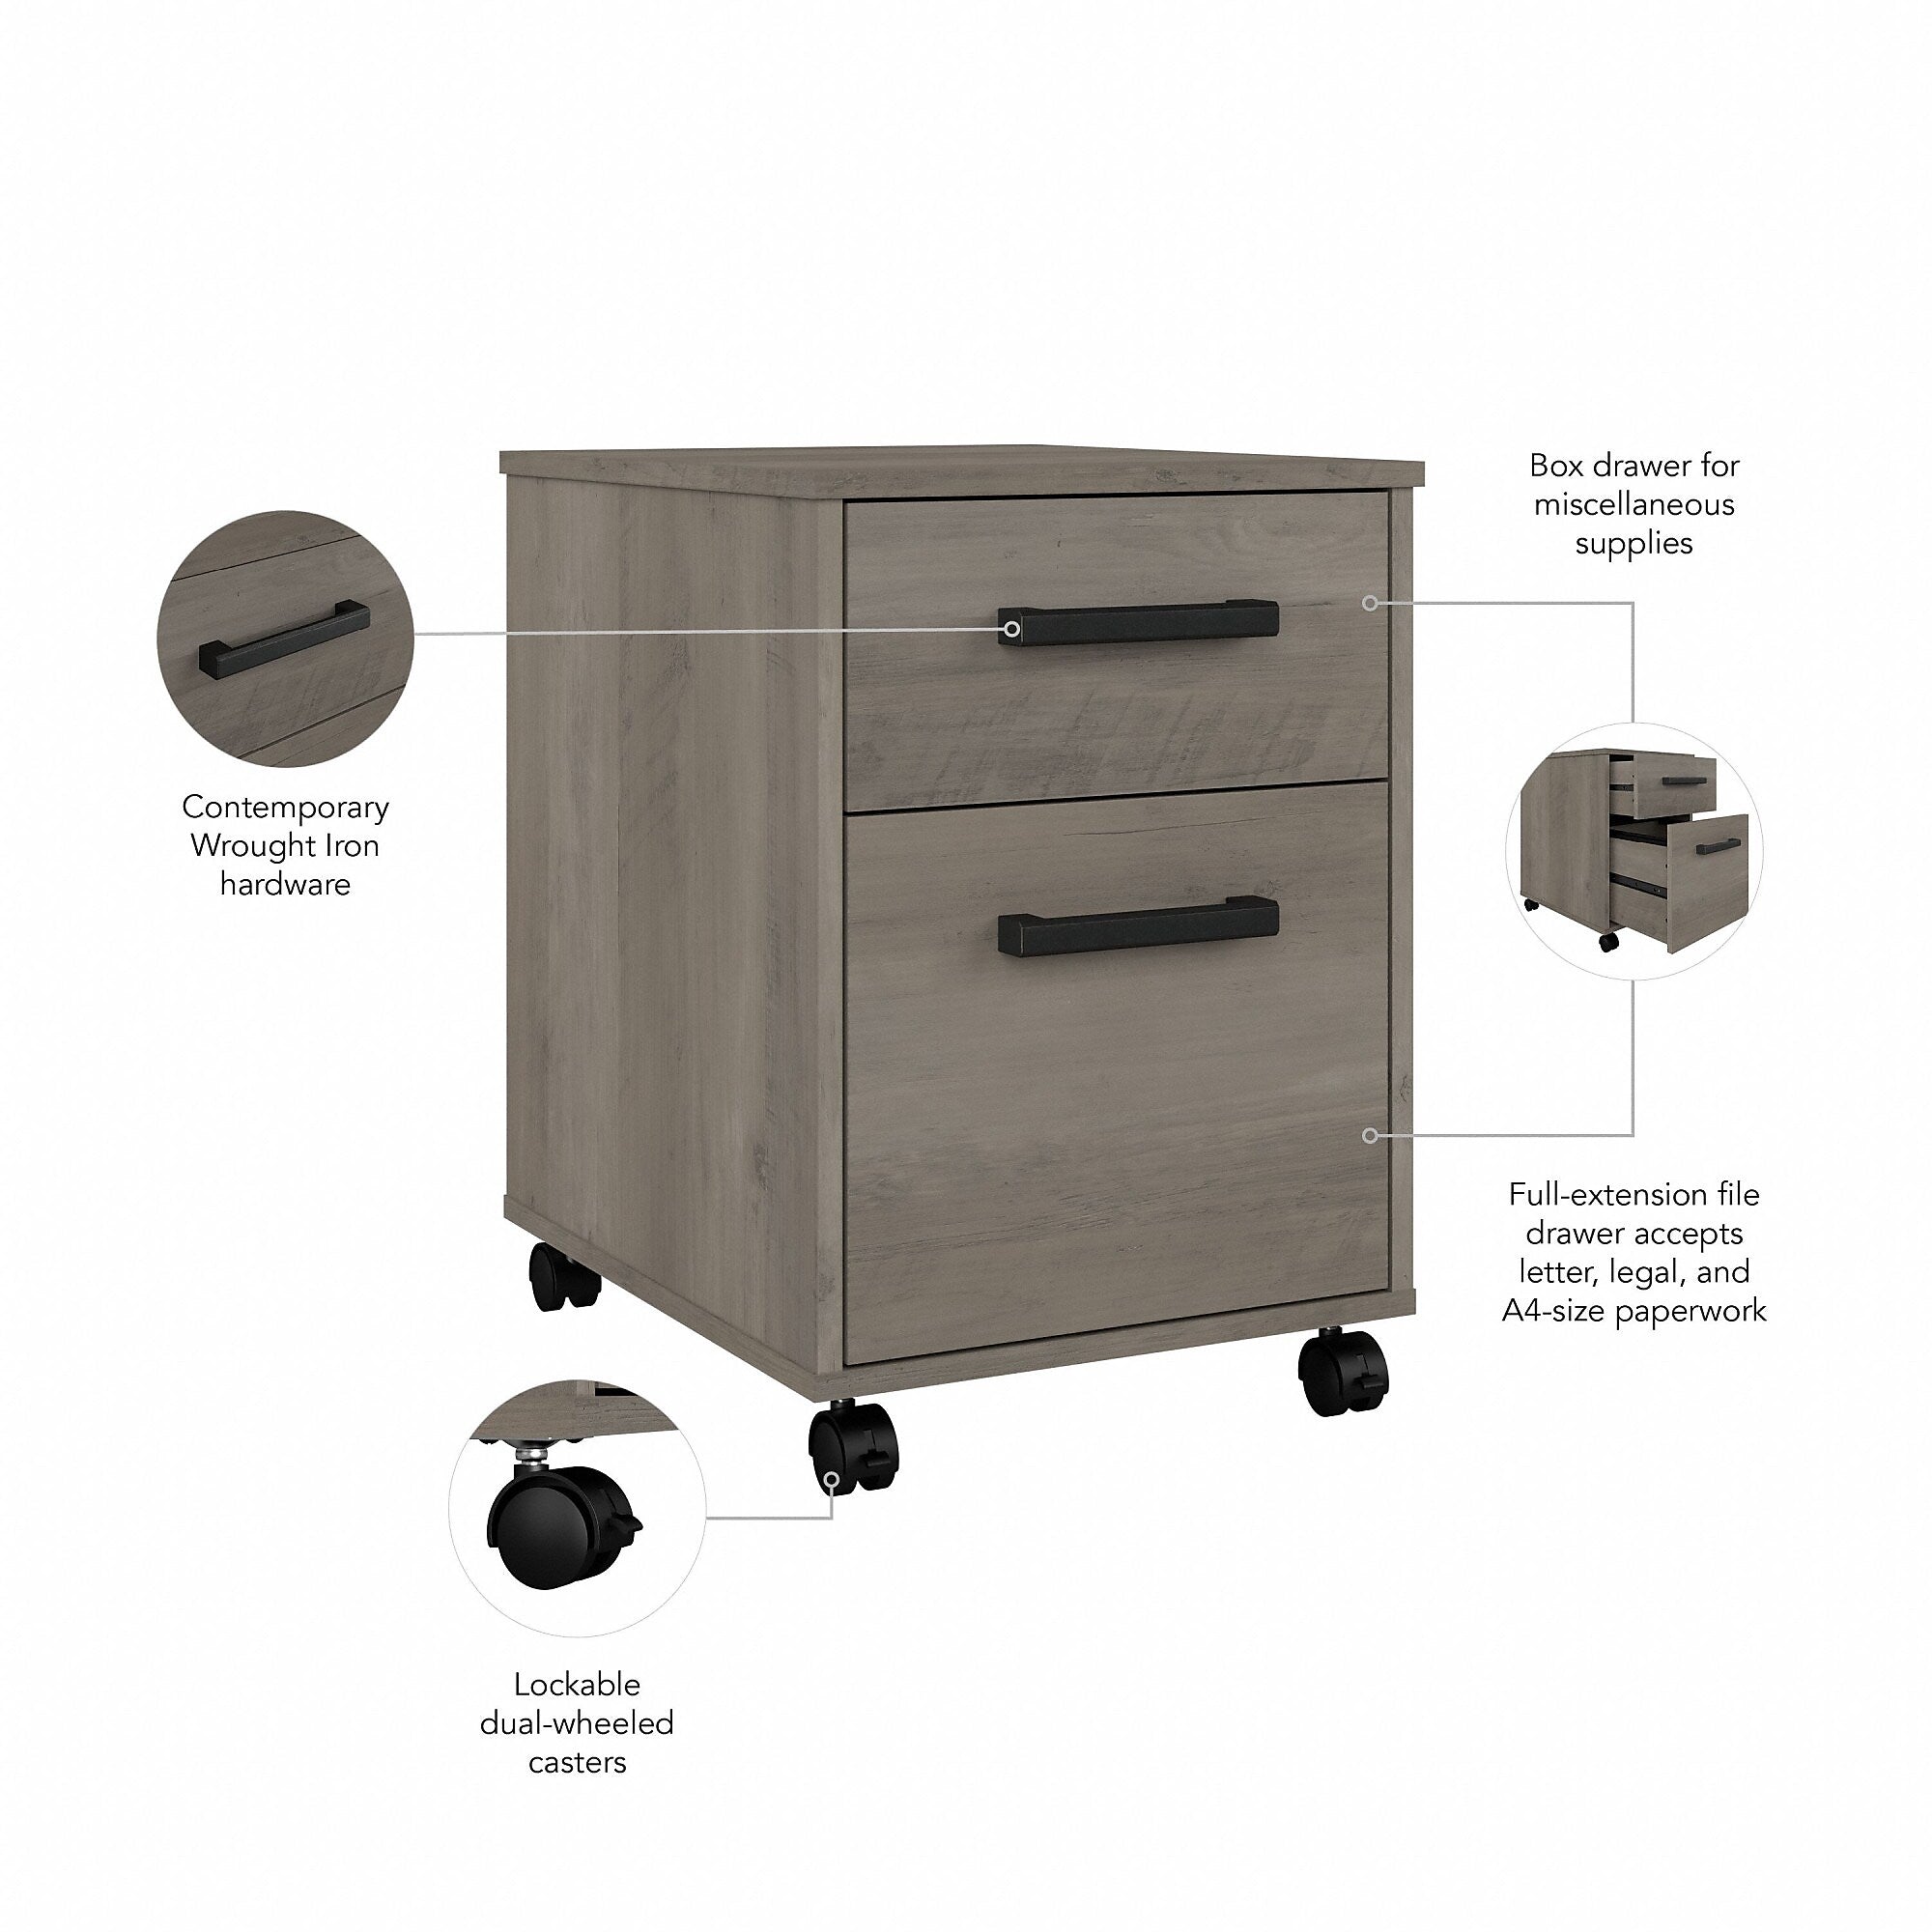 Bush Furniture City Park 60"W Industrial Writing Desk with Mobile File Cabinet, Driftwood Gray